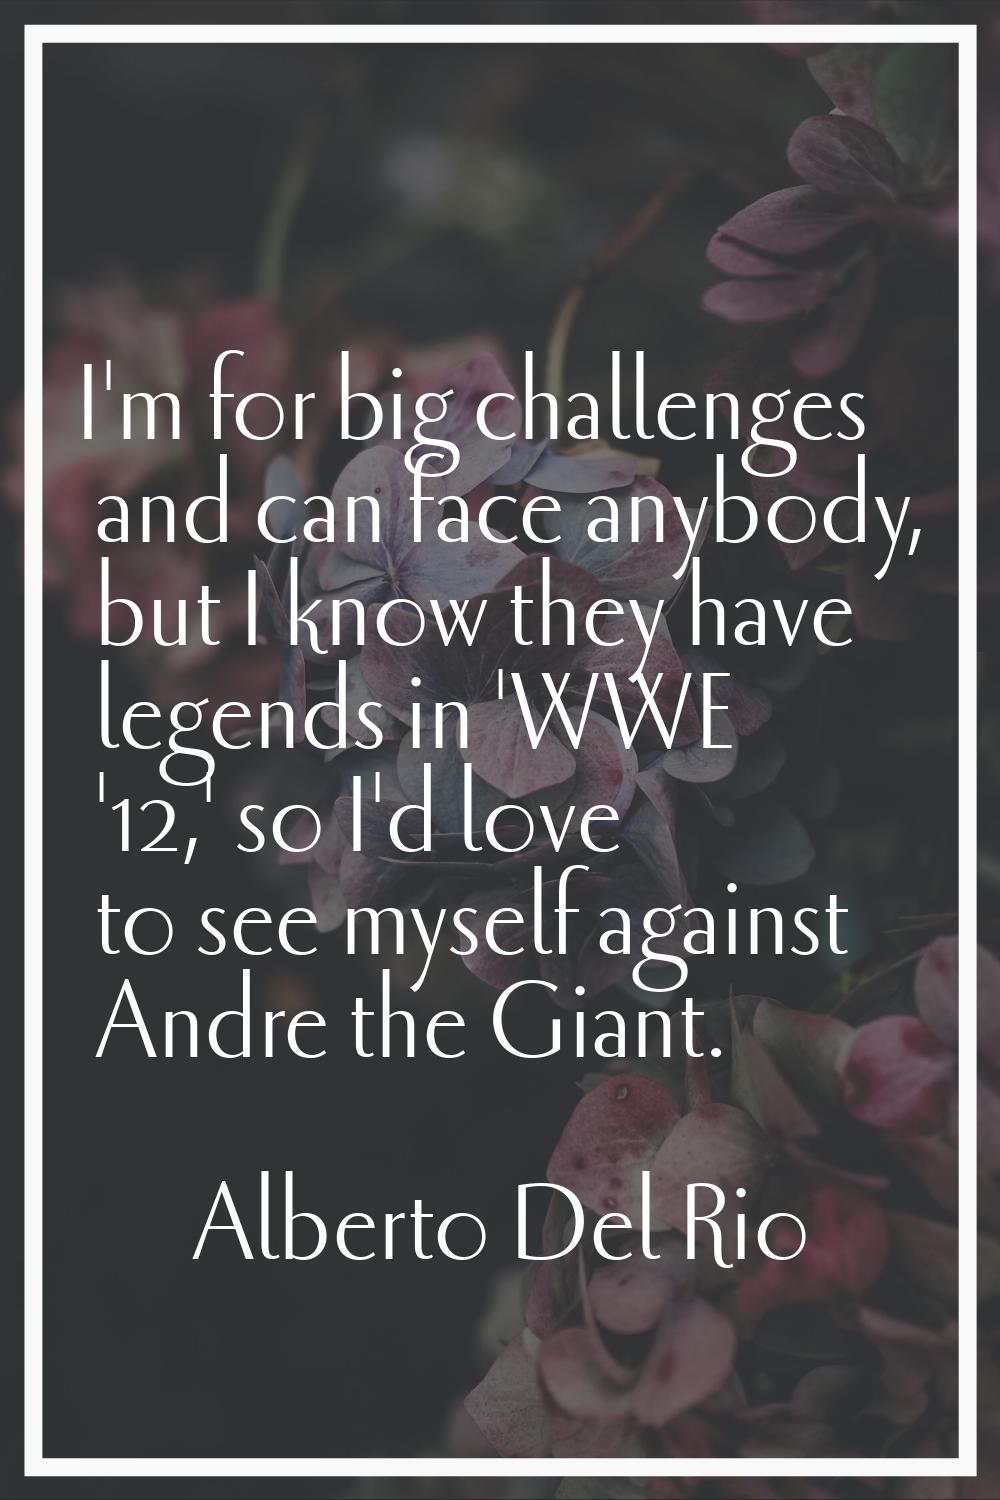 I'm for big challenges and can face anybody, but I know they have legends in 'WWE '12,' so I'd love